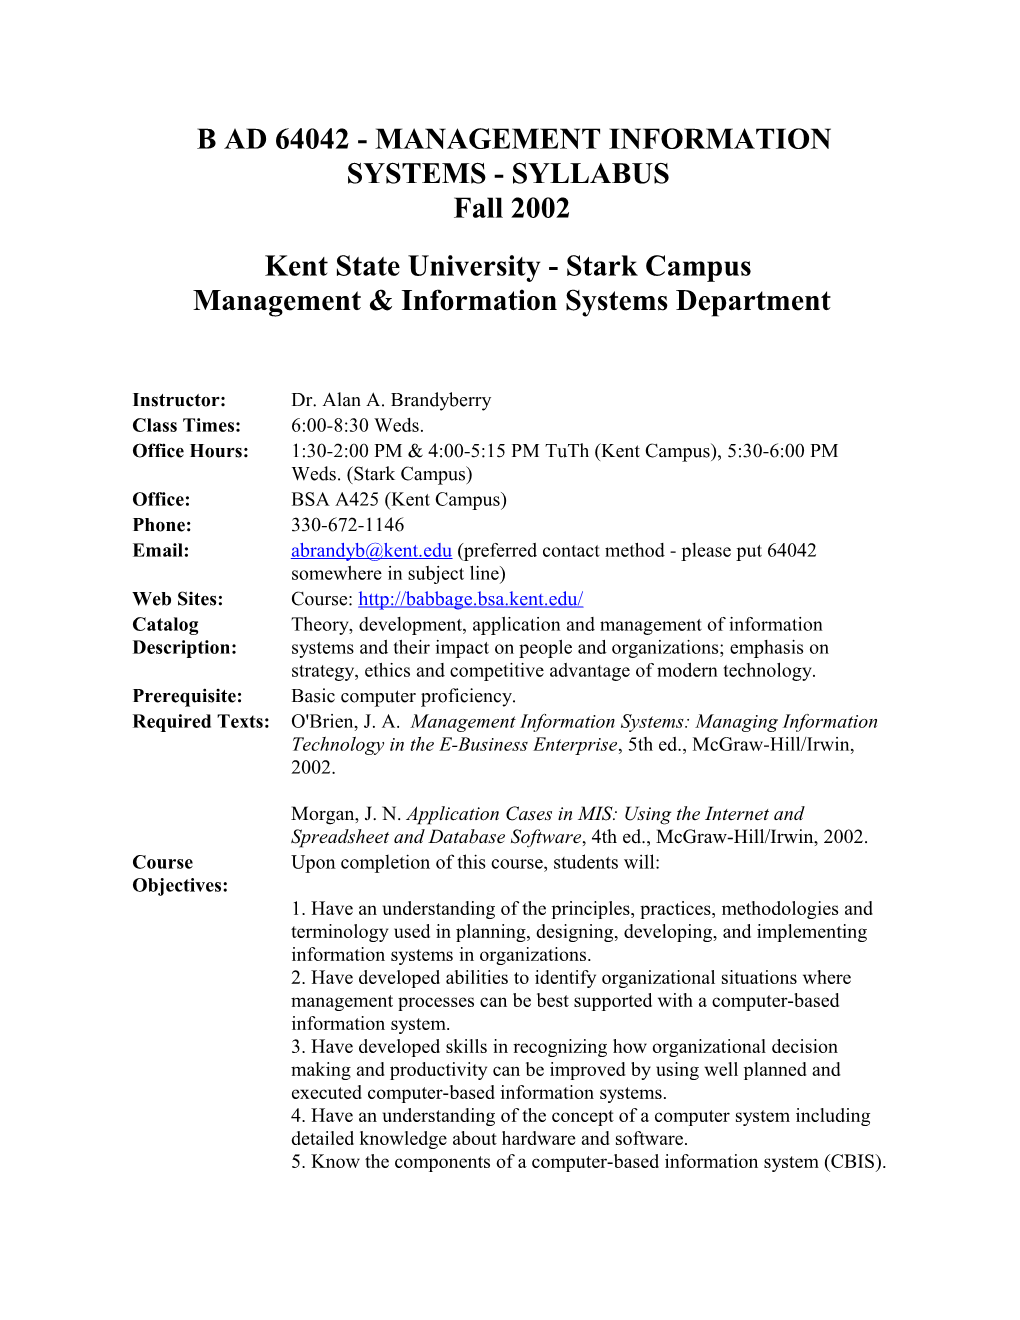 B Ad 64042 - Management Information Systems - Syllabus